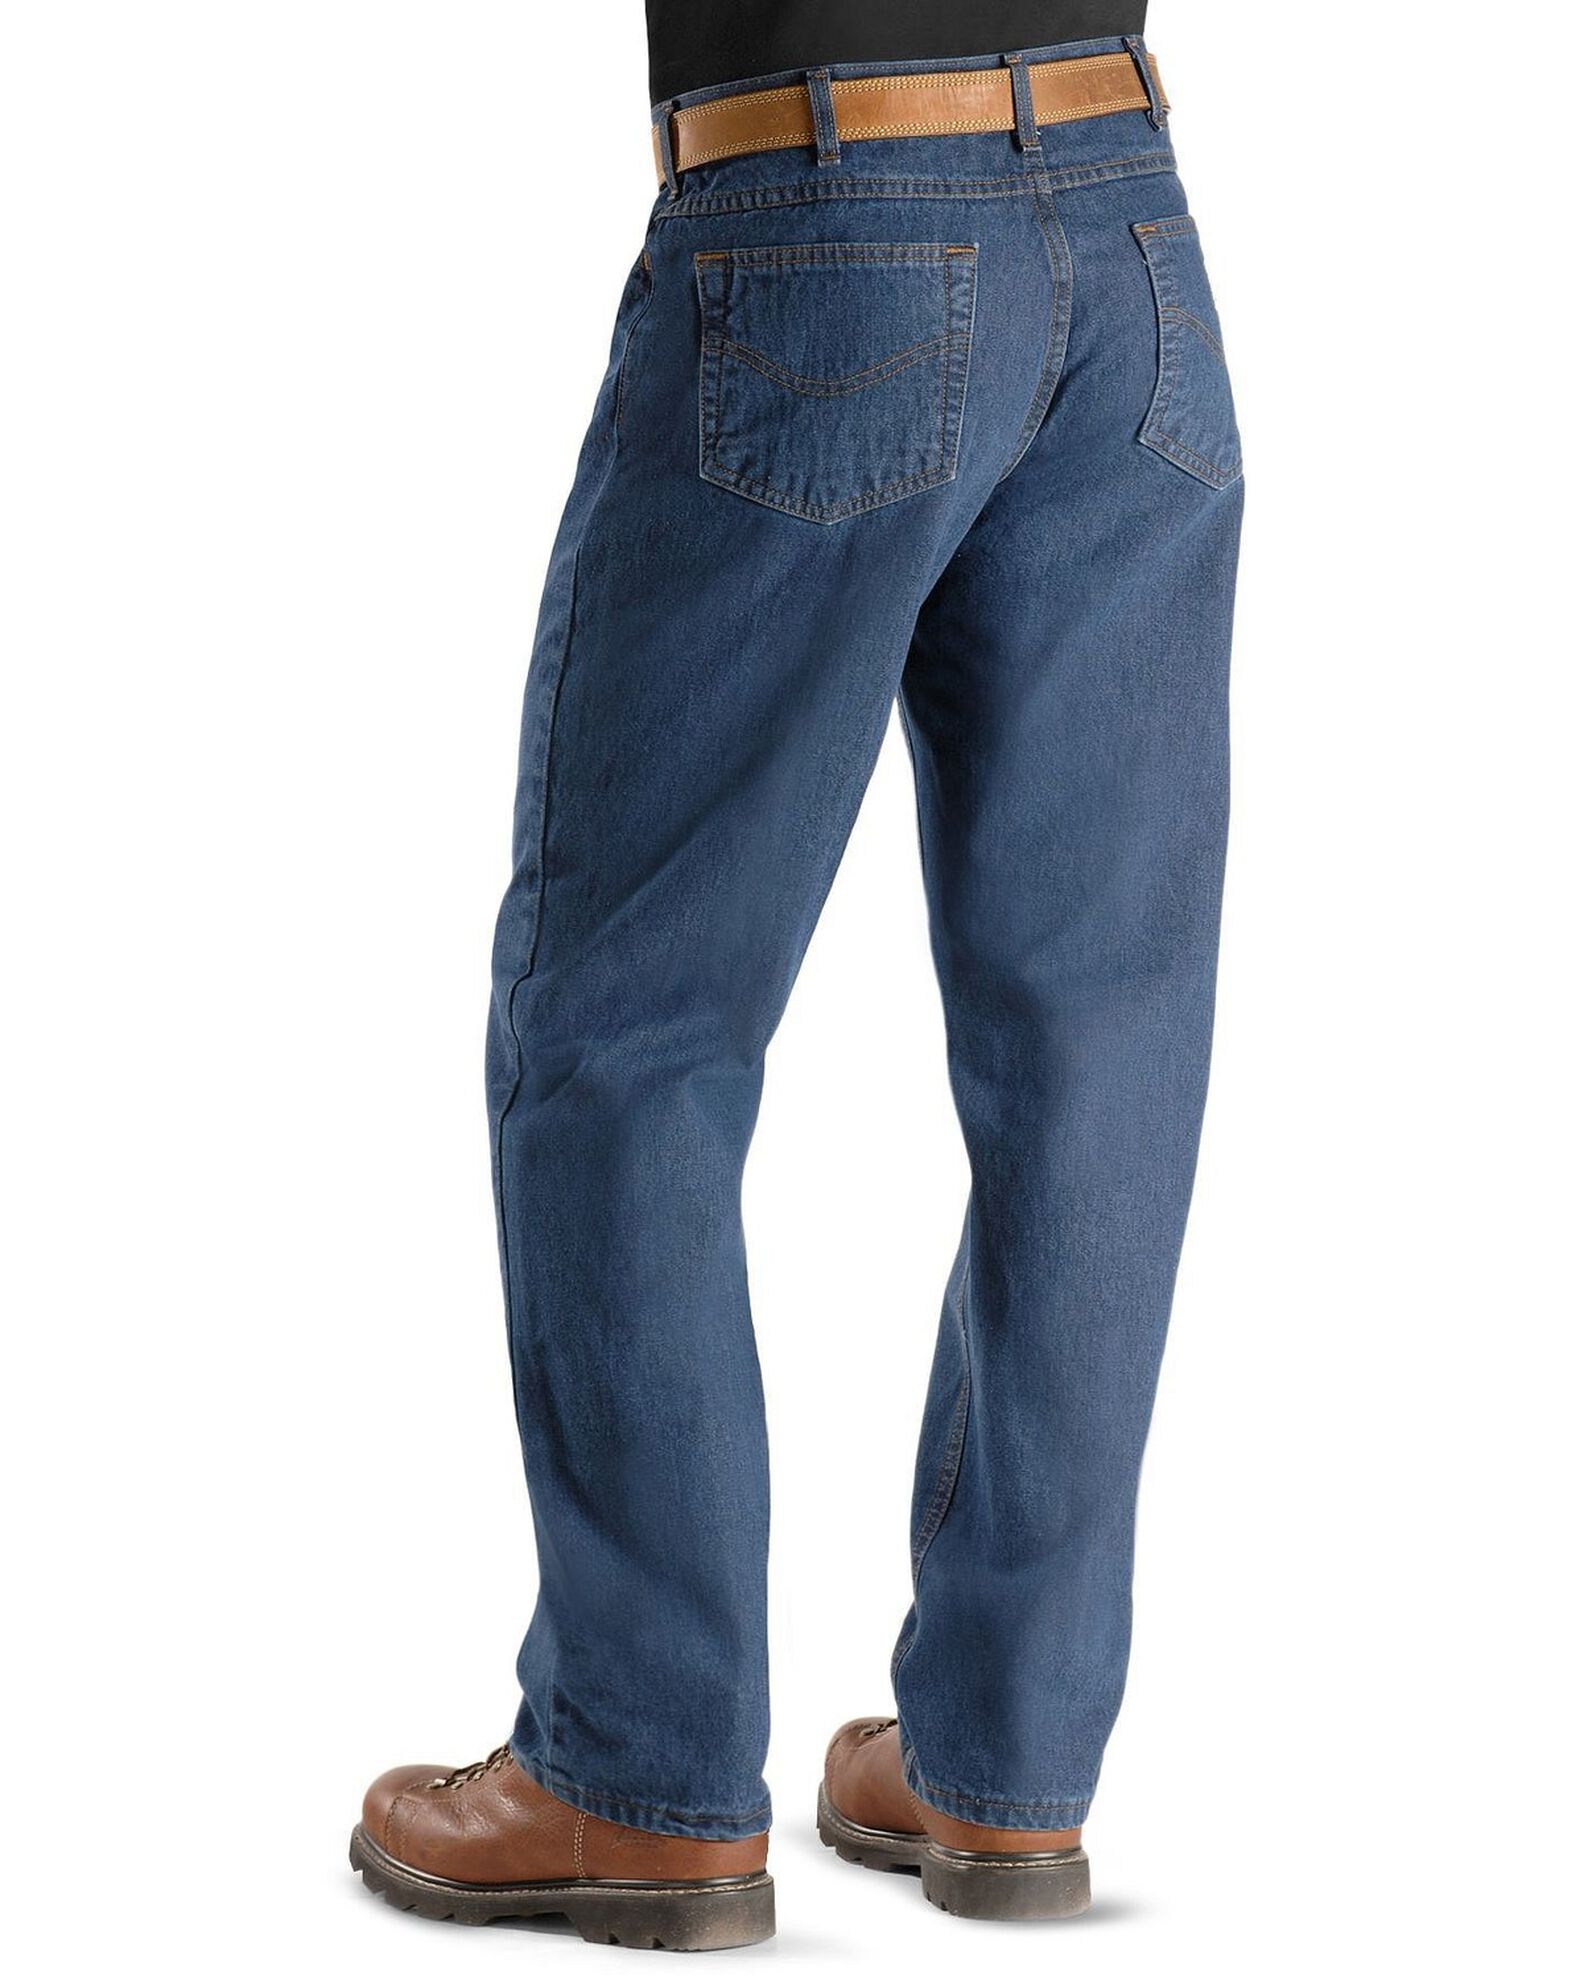 Product Name: Carhartt Flame Resistant Relaxed Fit Work Jean